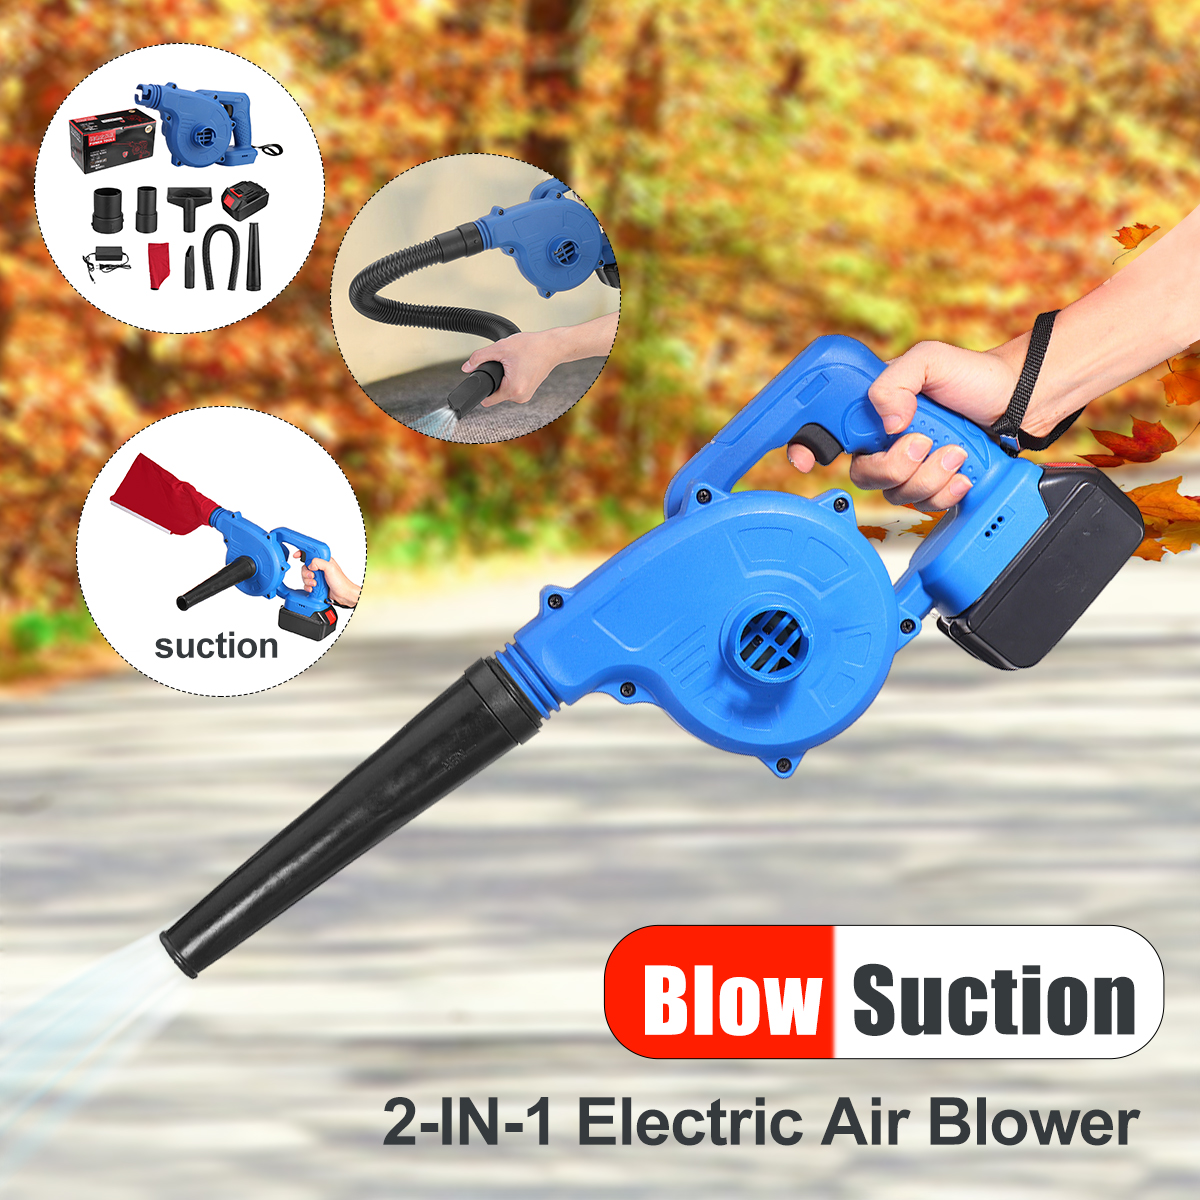 2-IN-1-Electric-Air-Blower-Kit-Cleaner-Wireless-Air-Fan-Dust-Blowing-Computer-Dust-Collector-Adapted-1838499-1